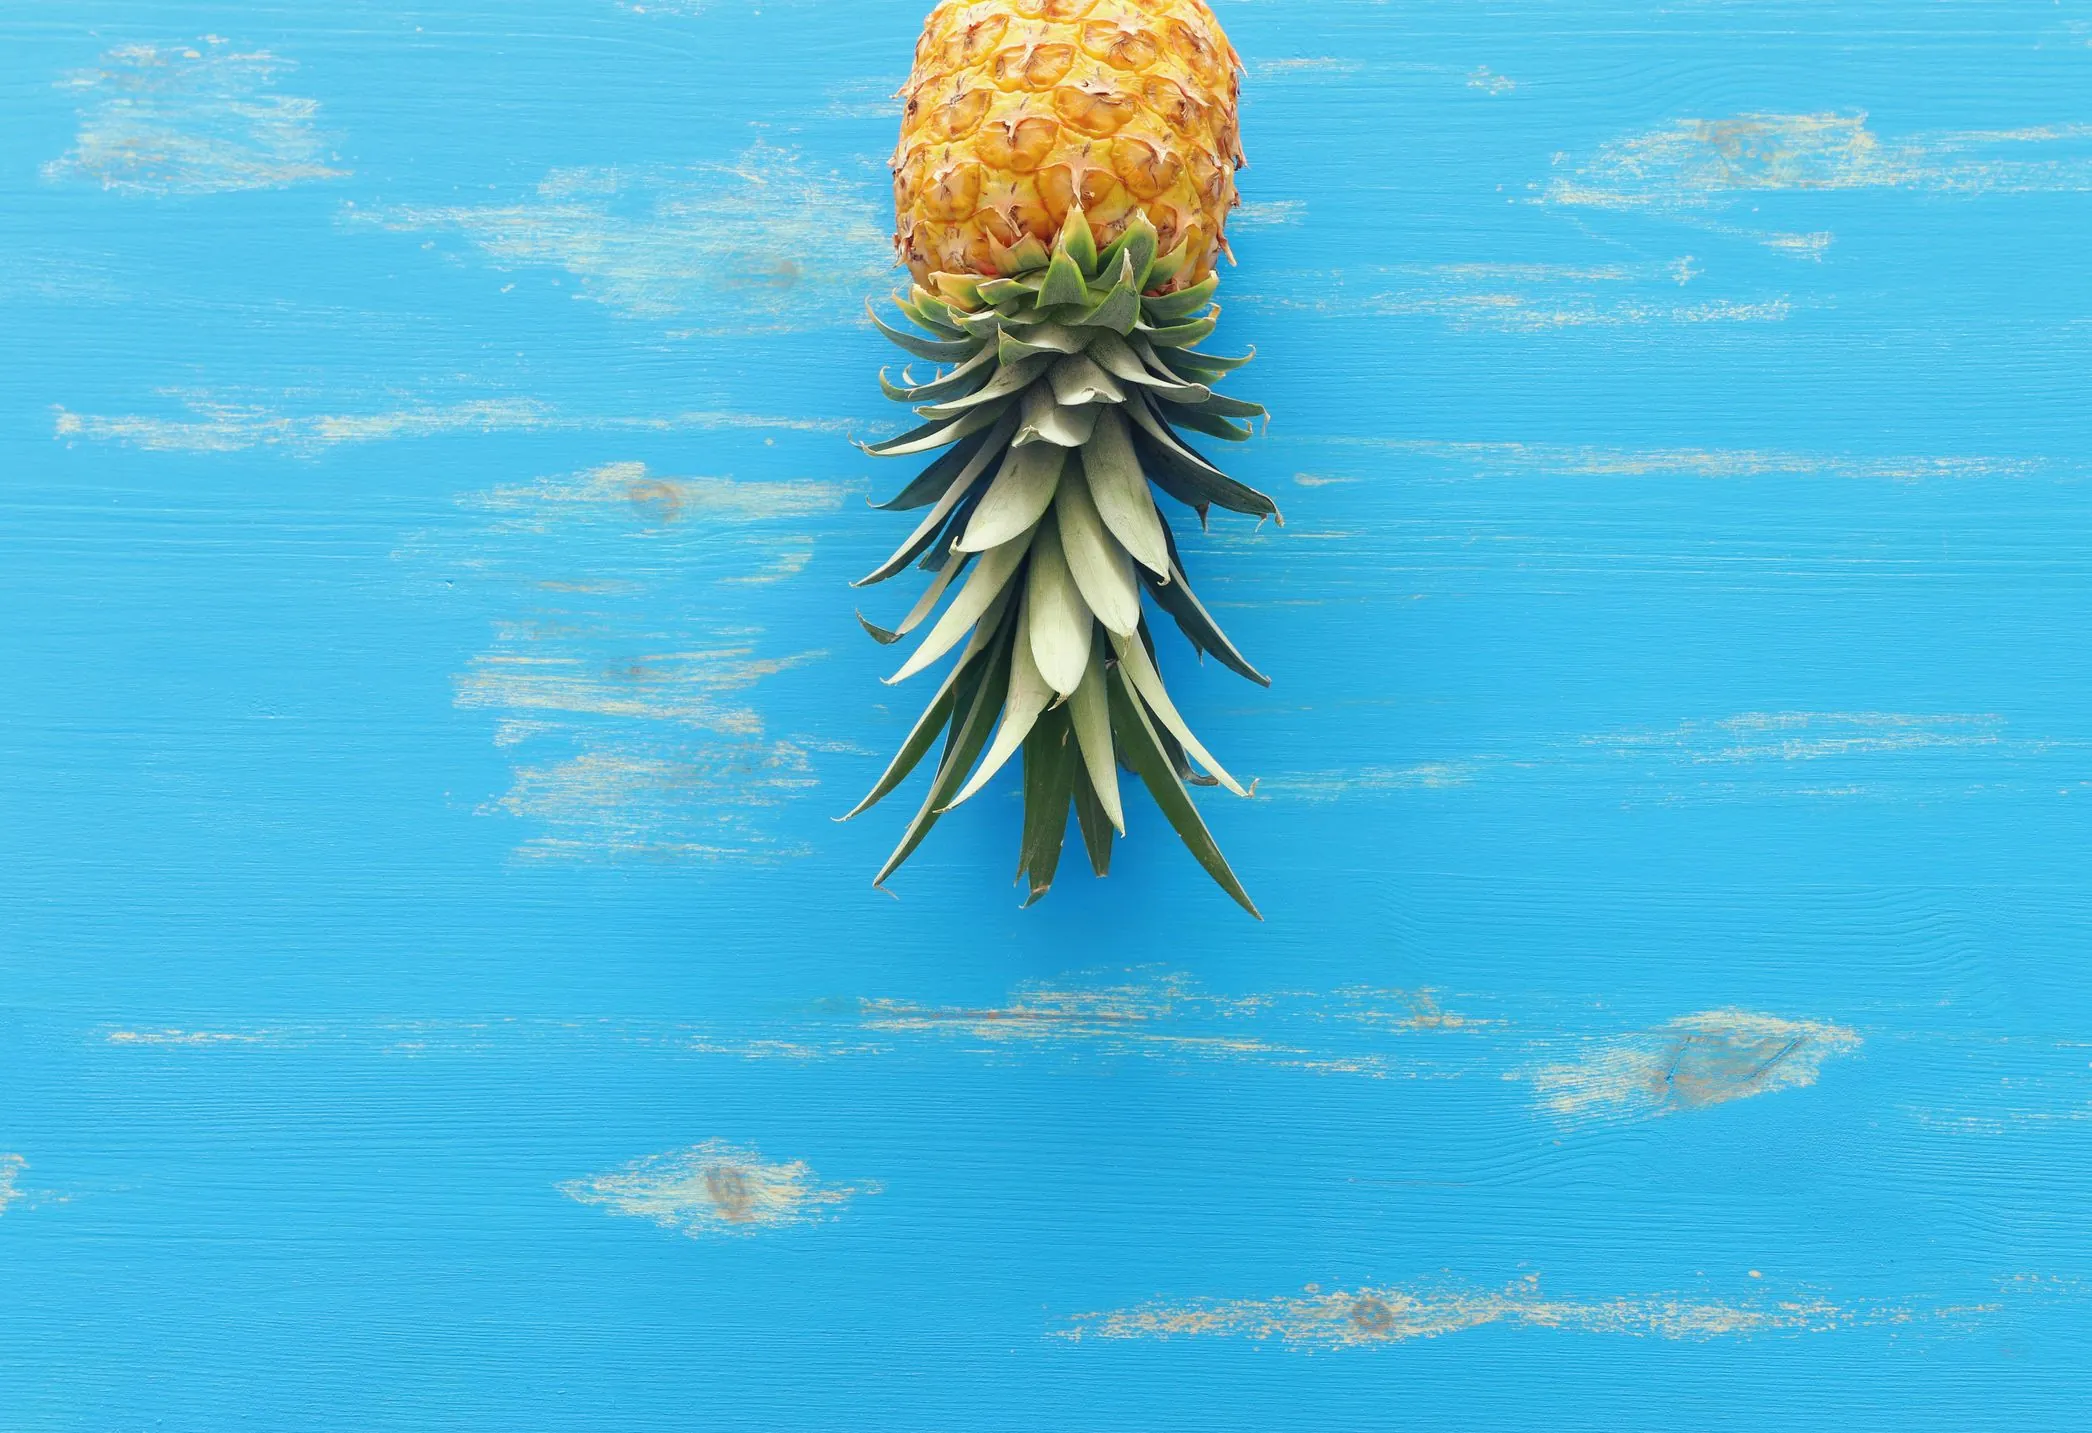 upside down pineapple meaning